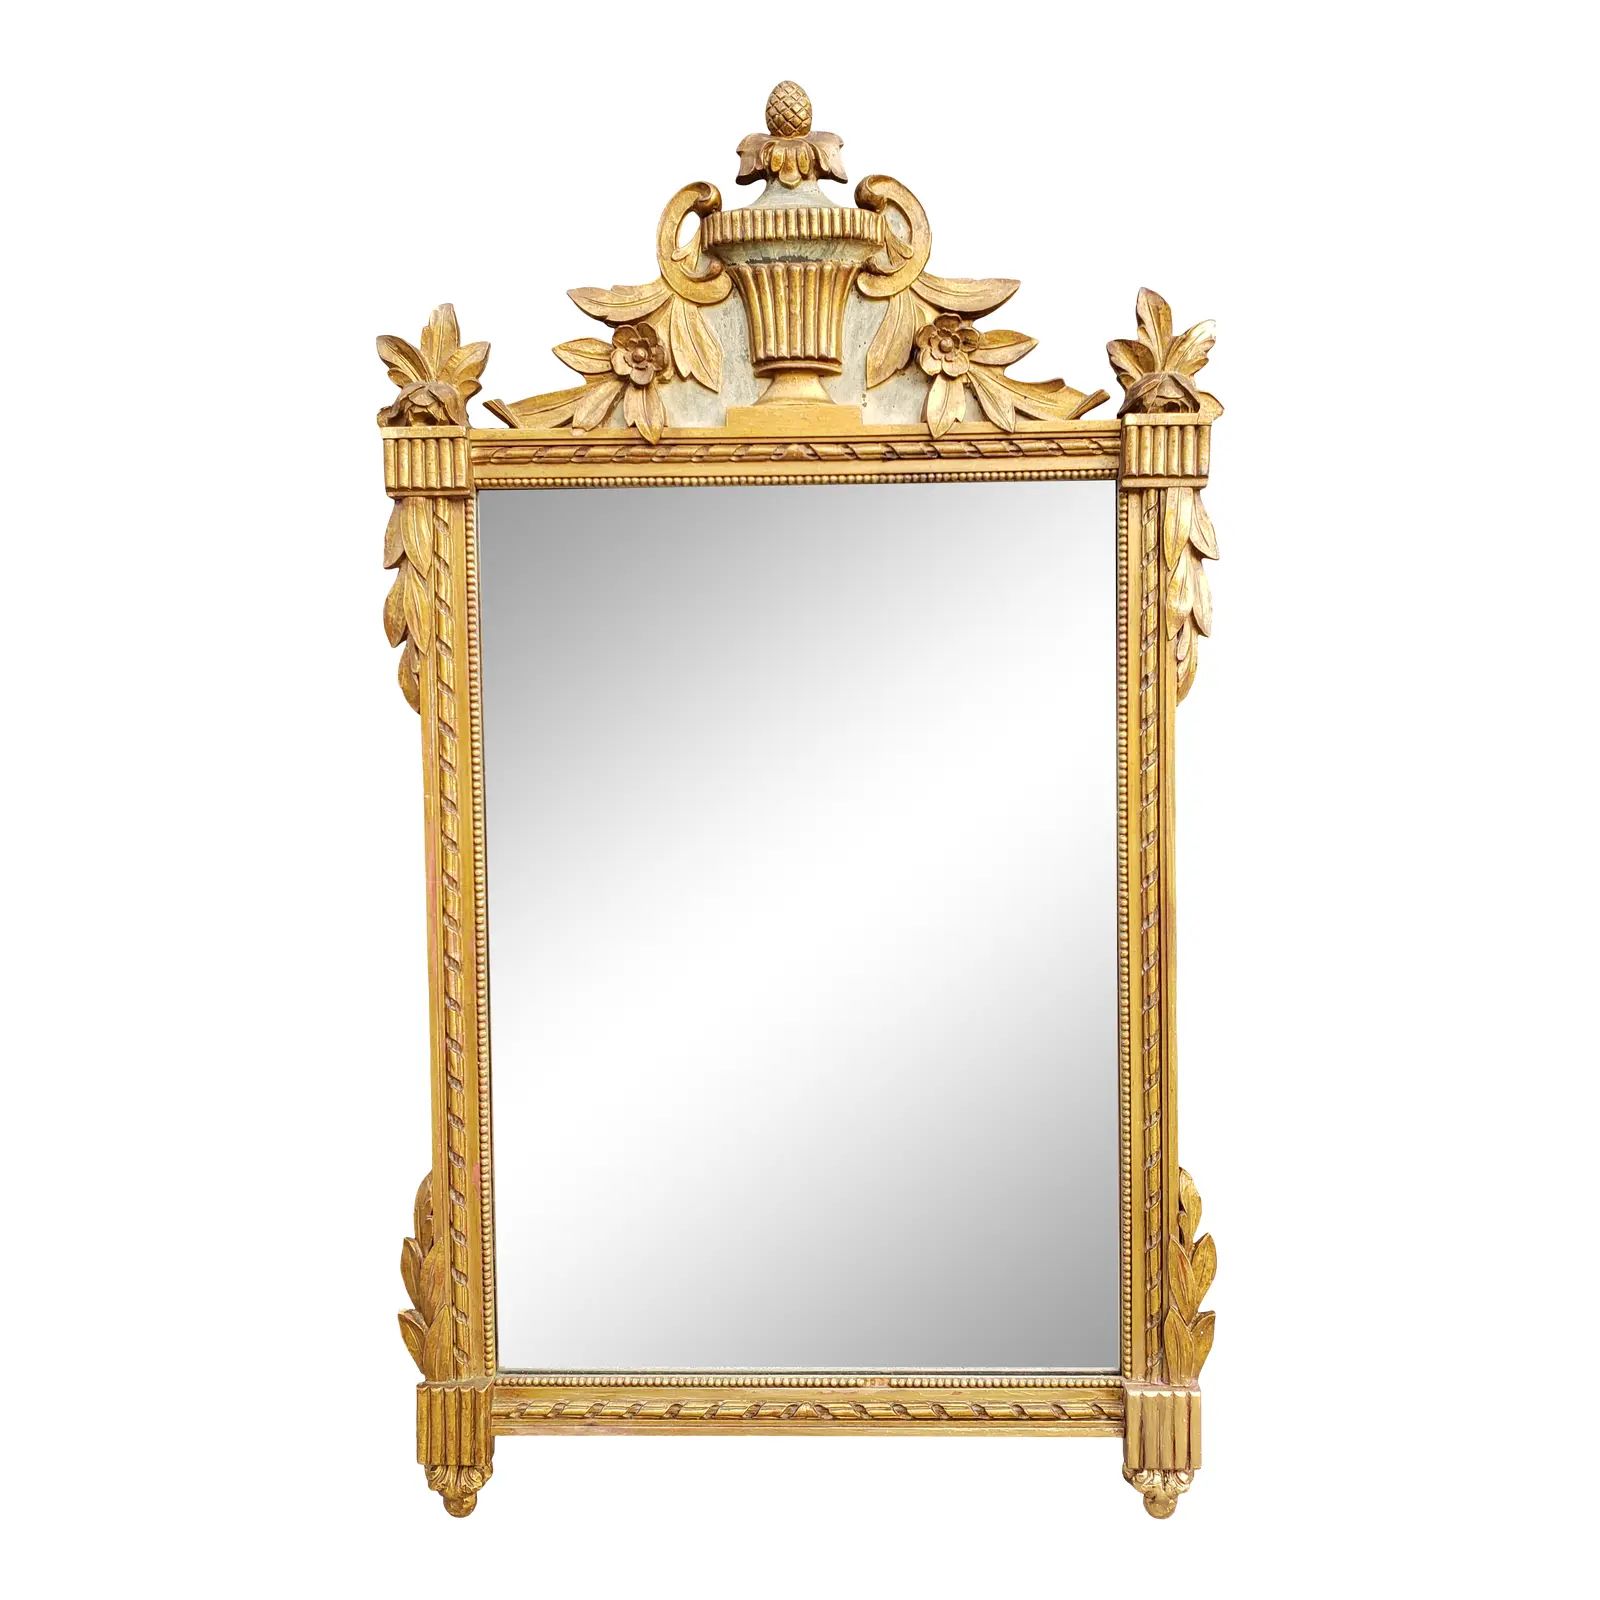 Antique French Giltwood Painted Mirror | Chairish